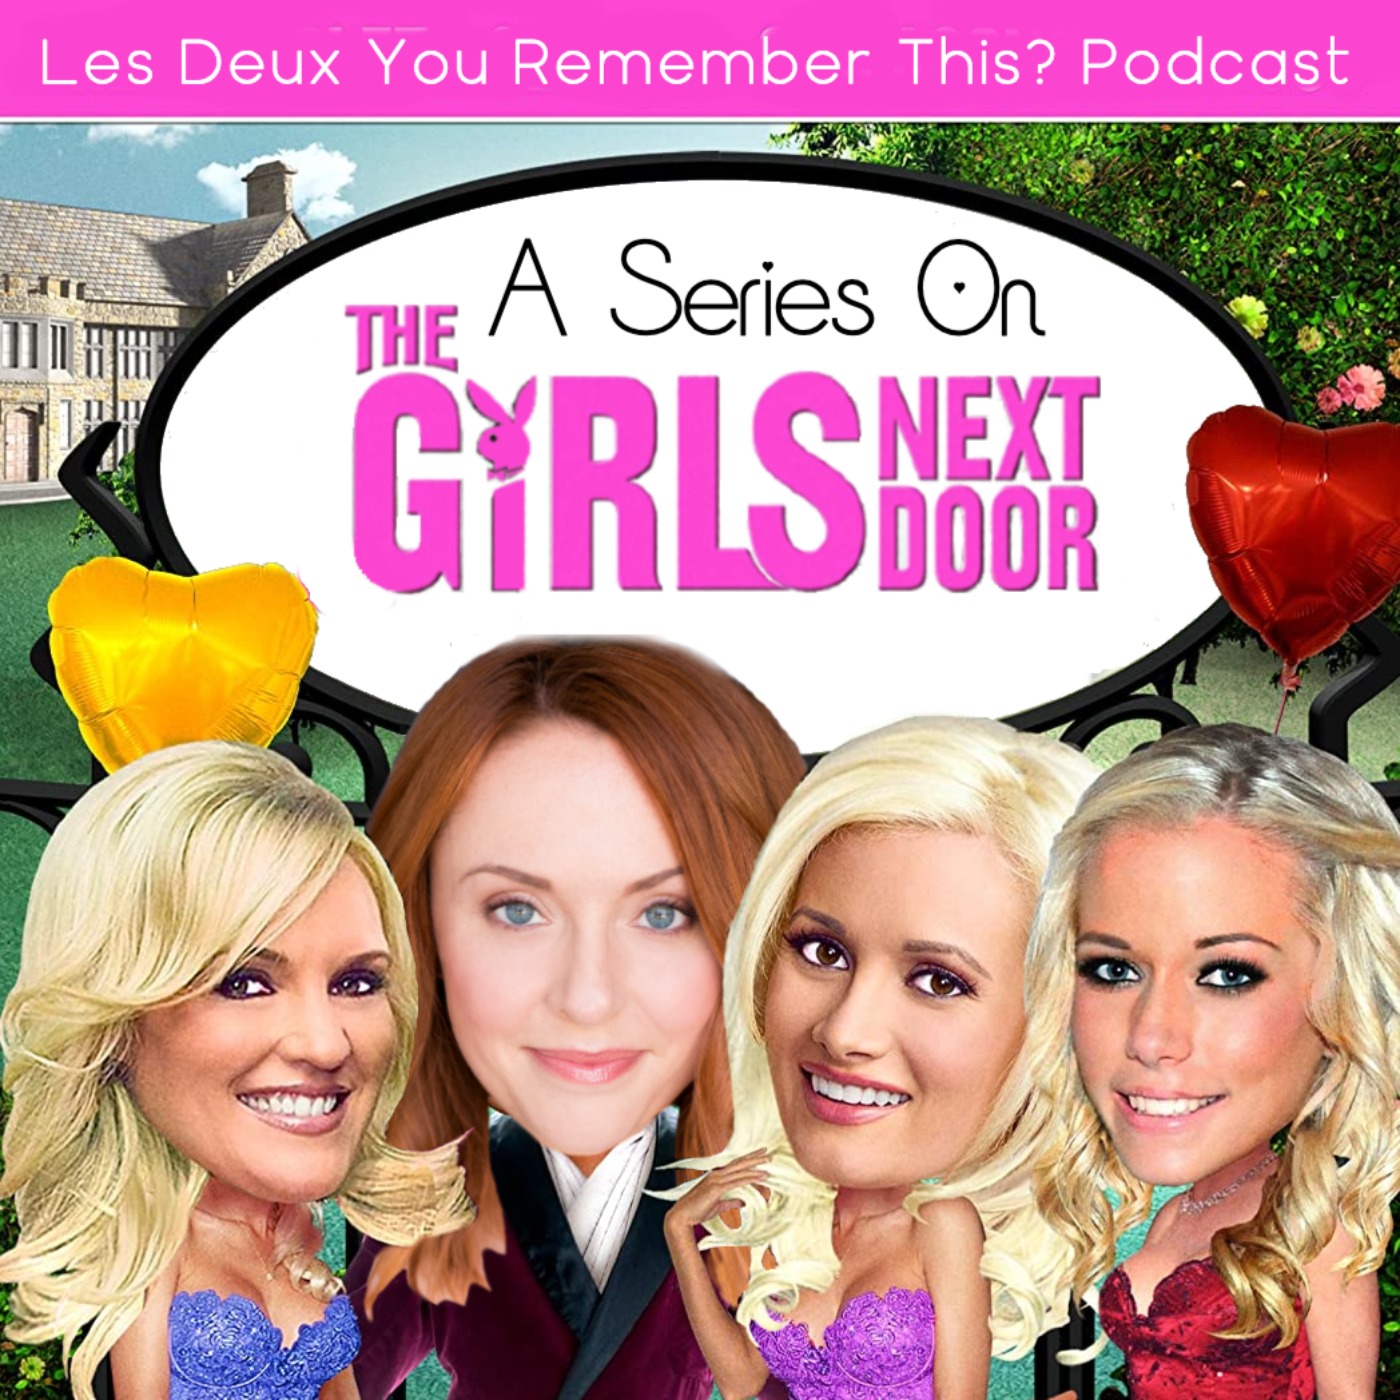 Molly McAleer and I Discuss S1Ep03 of The Girls Next Door